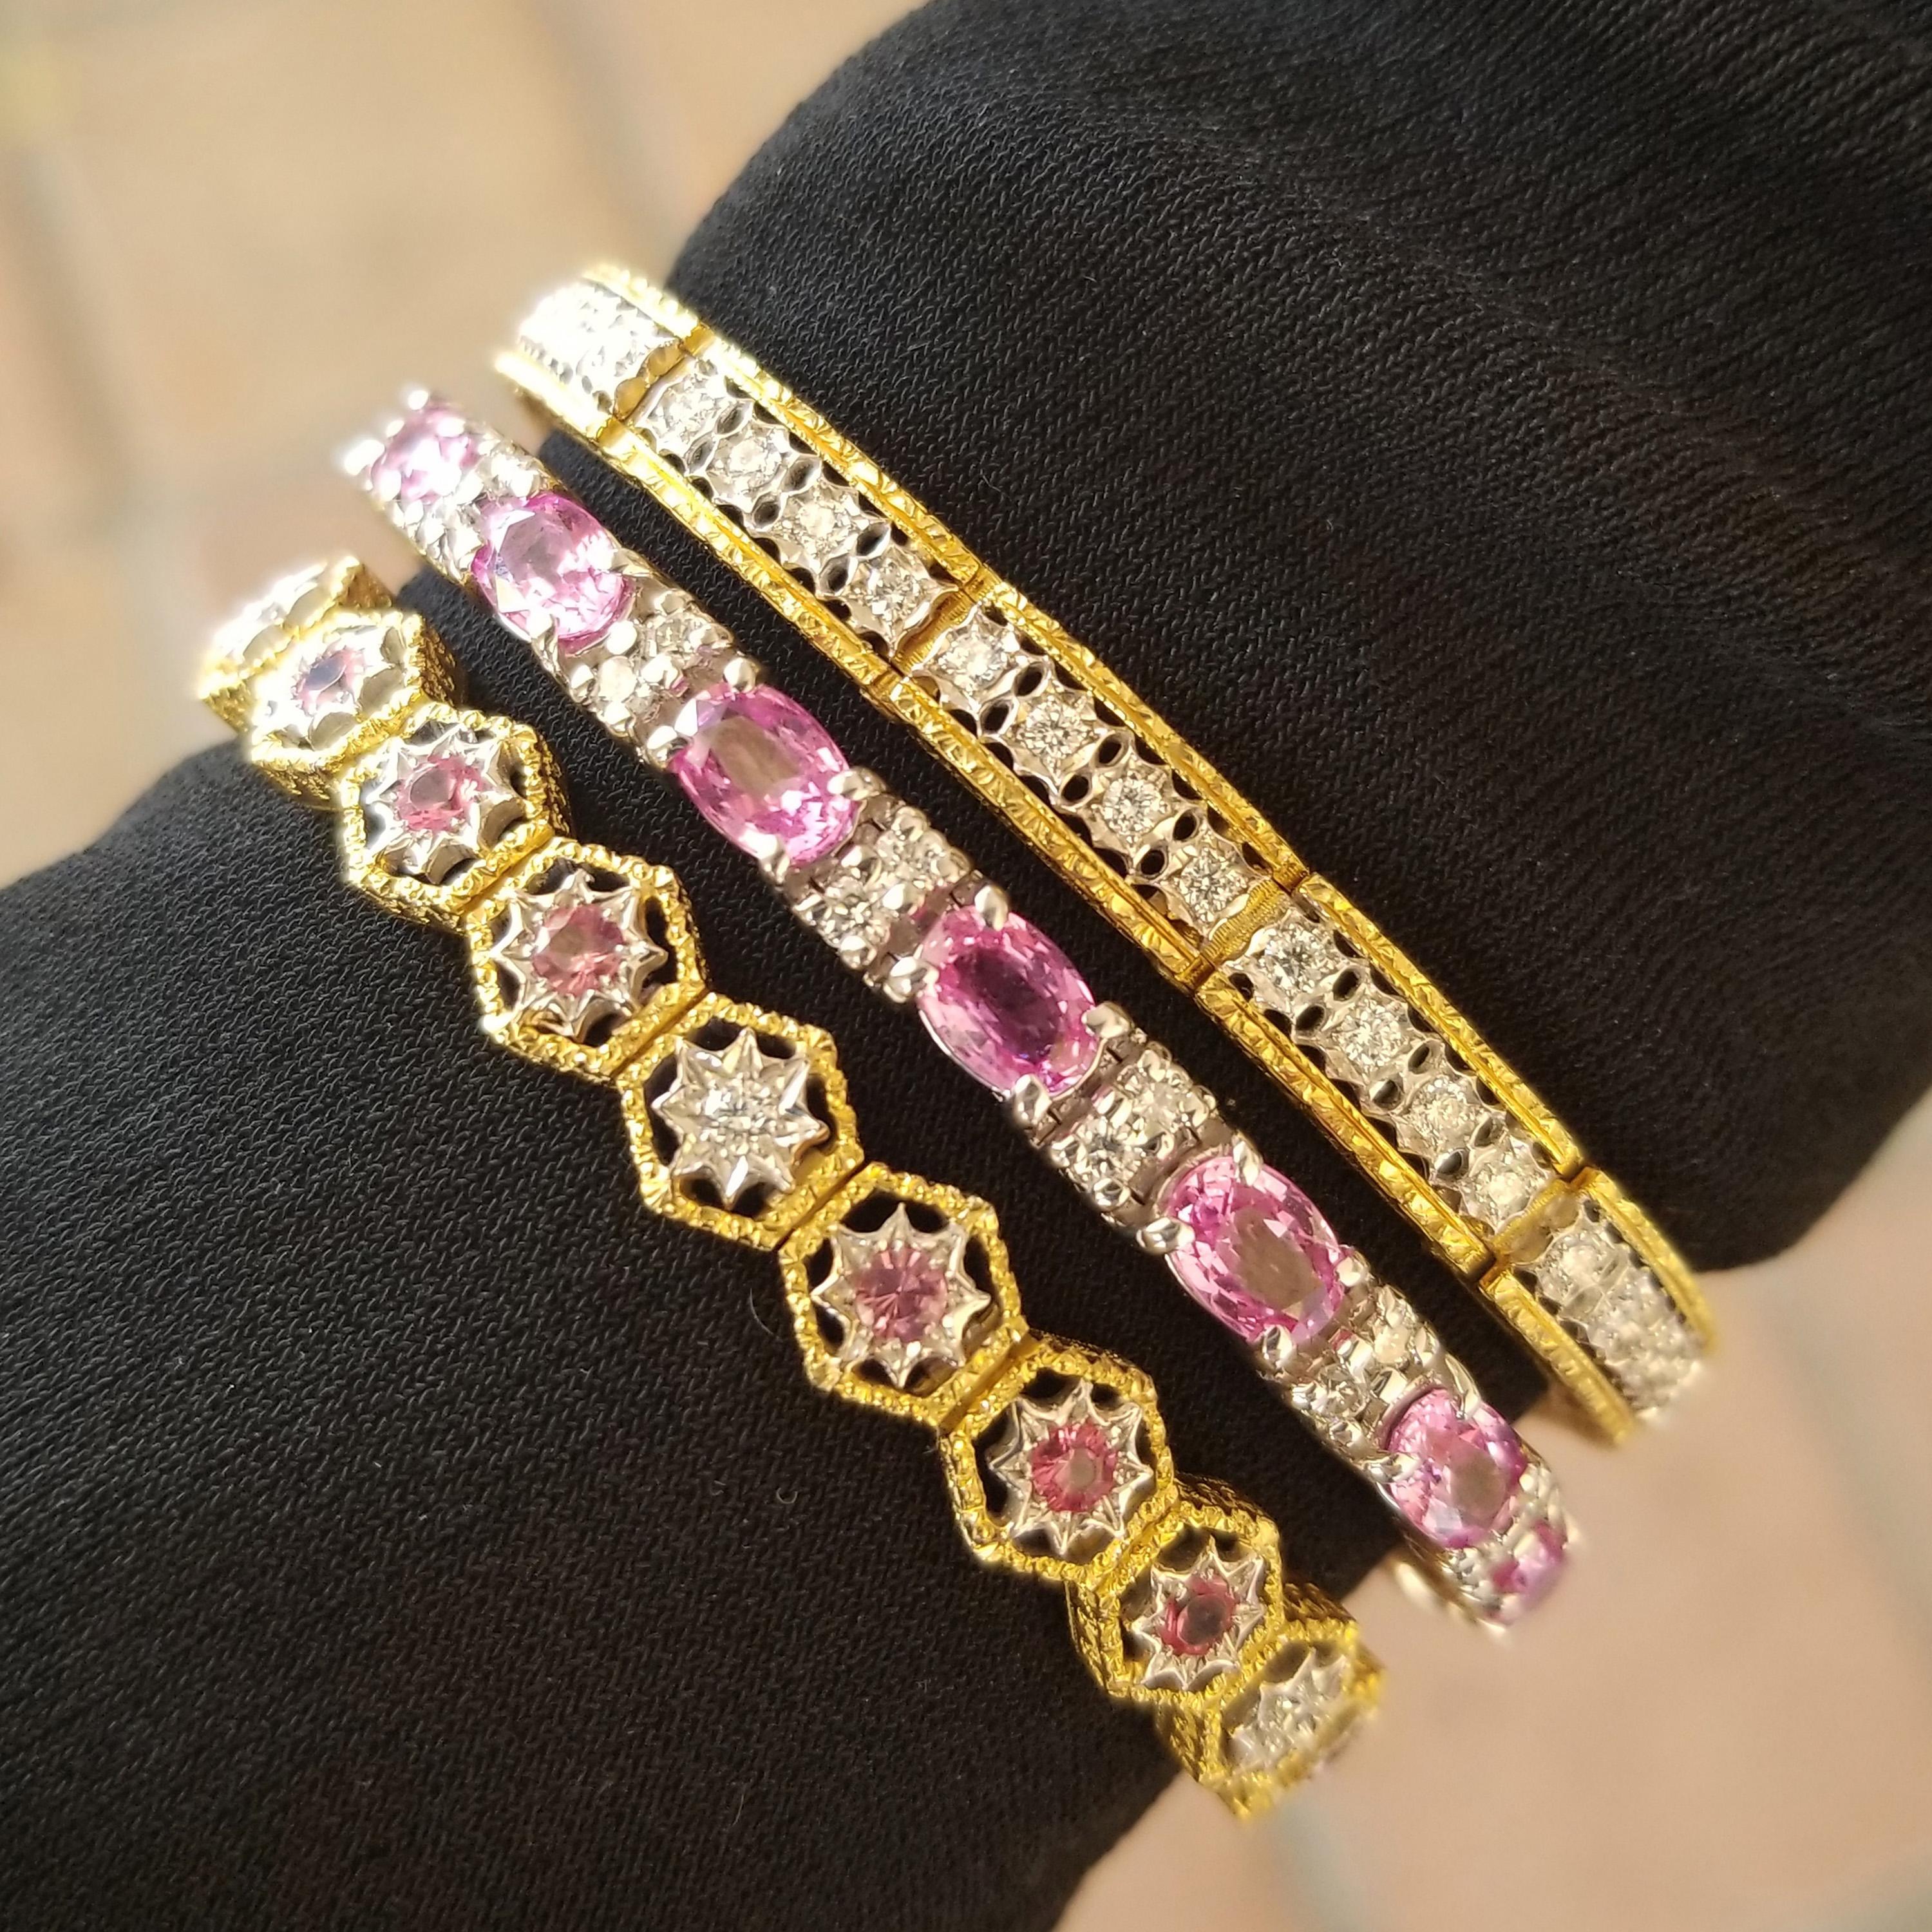 These bright and lively hot pink spinels feature a saturated color which gemstone aficionados will recognize as the classic Mahenge color. The intense color is entirely natural and untreated.

